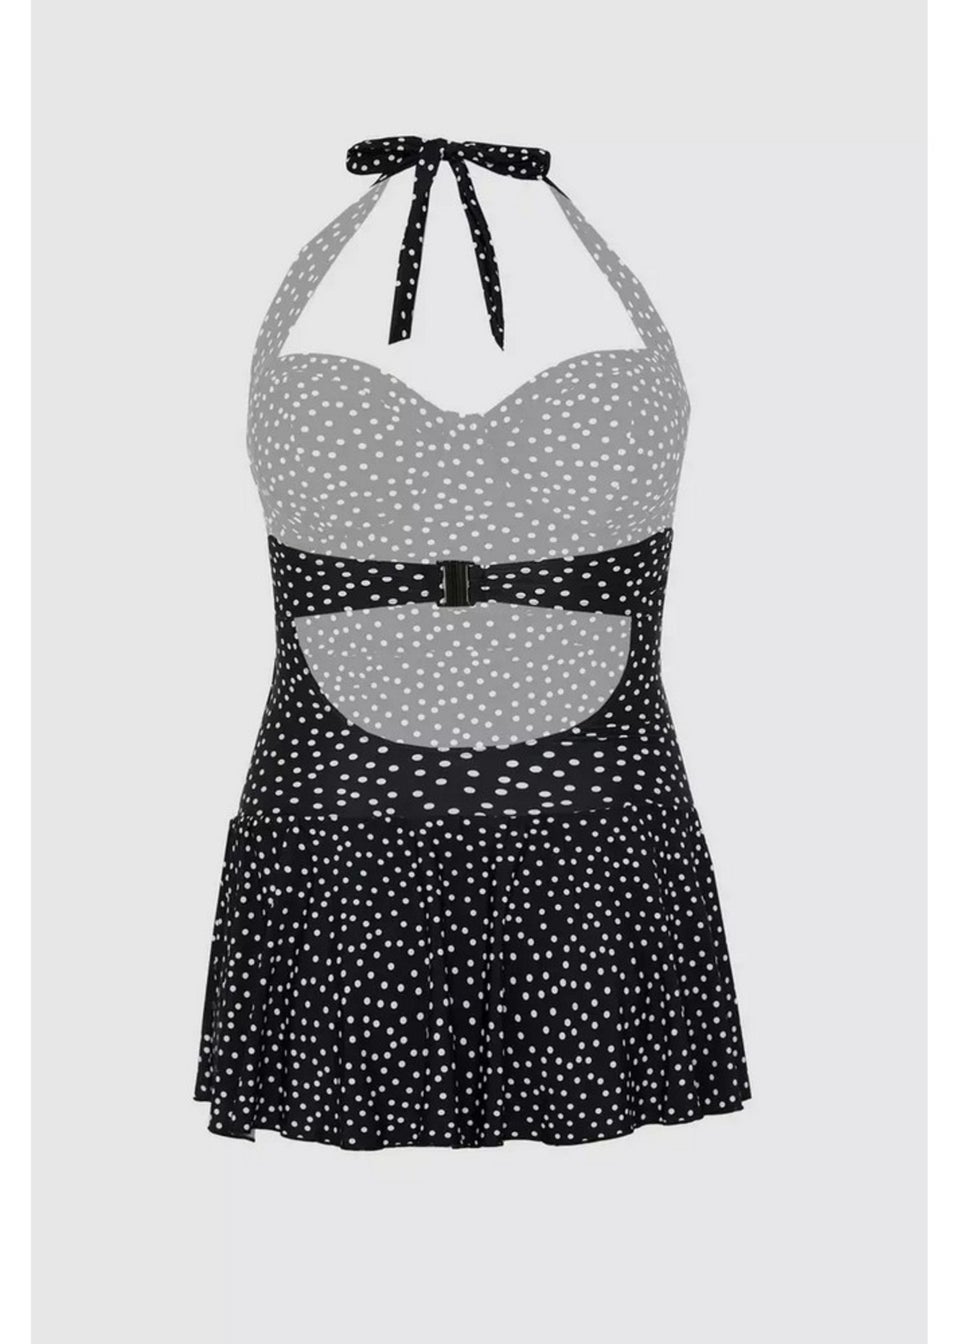 Gorgeous Black/White Spotted Skirted One Piece Swimsuit